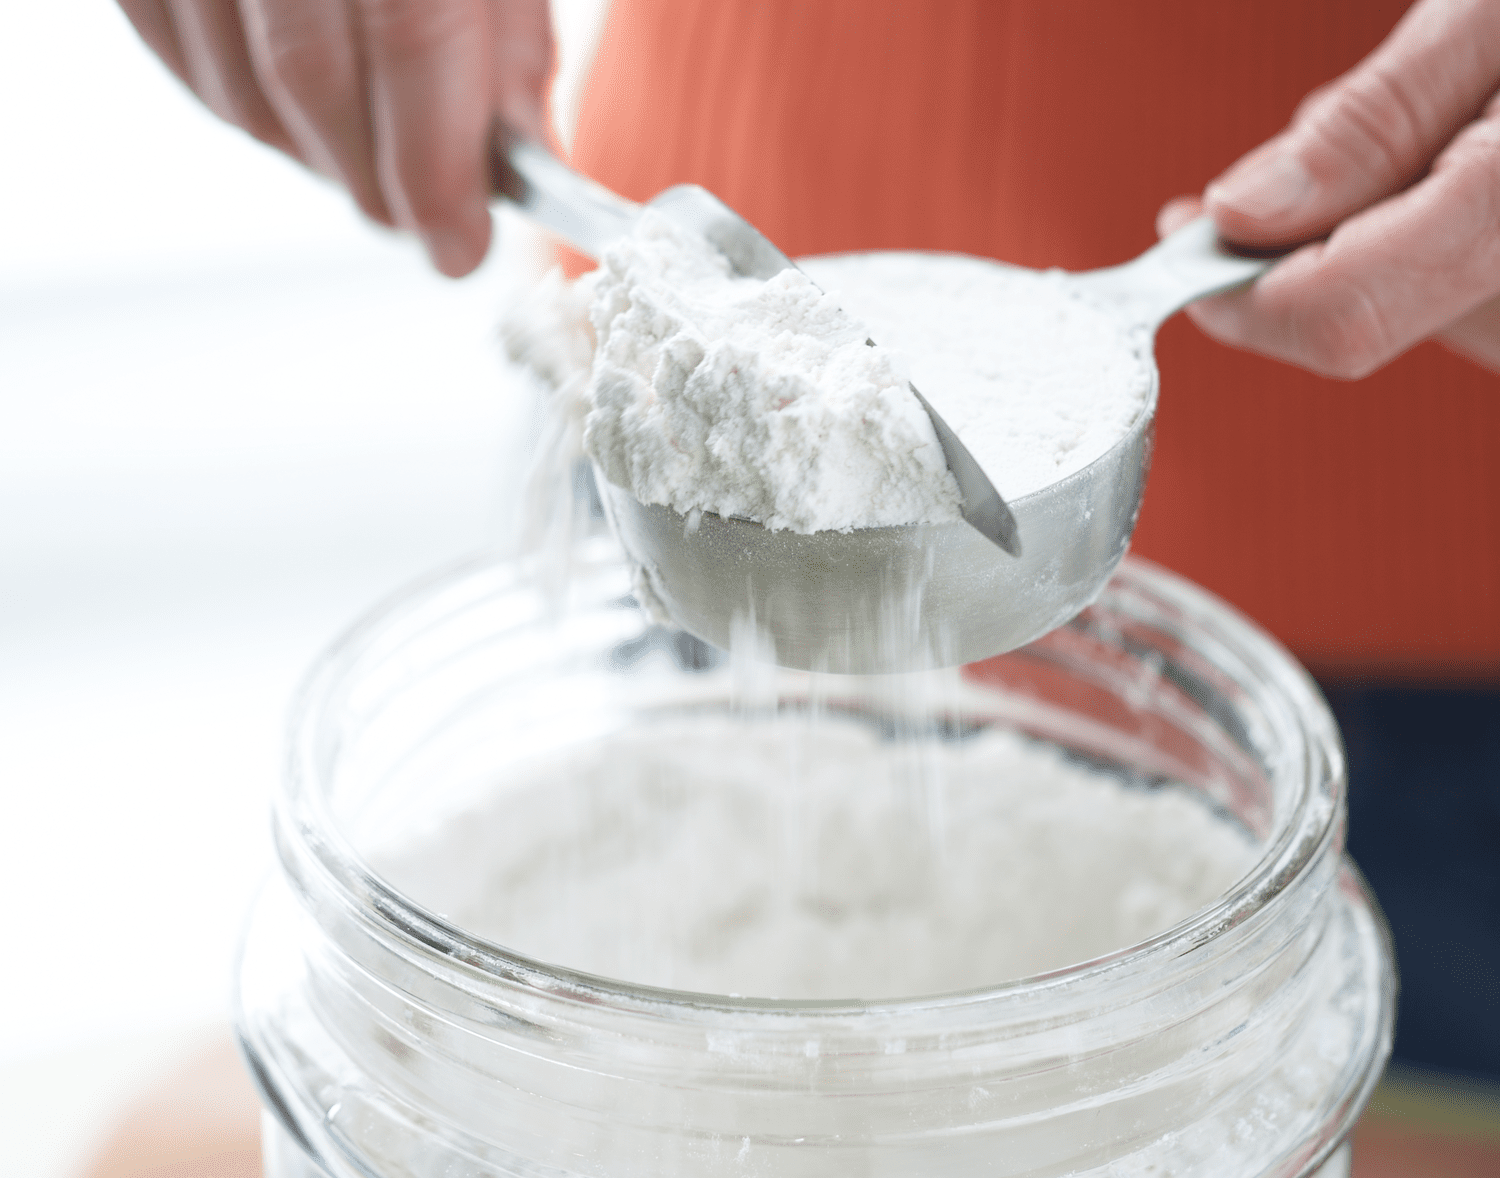 scraping excess flour off measuring cup